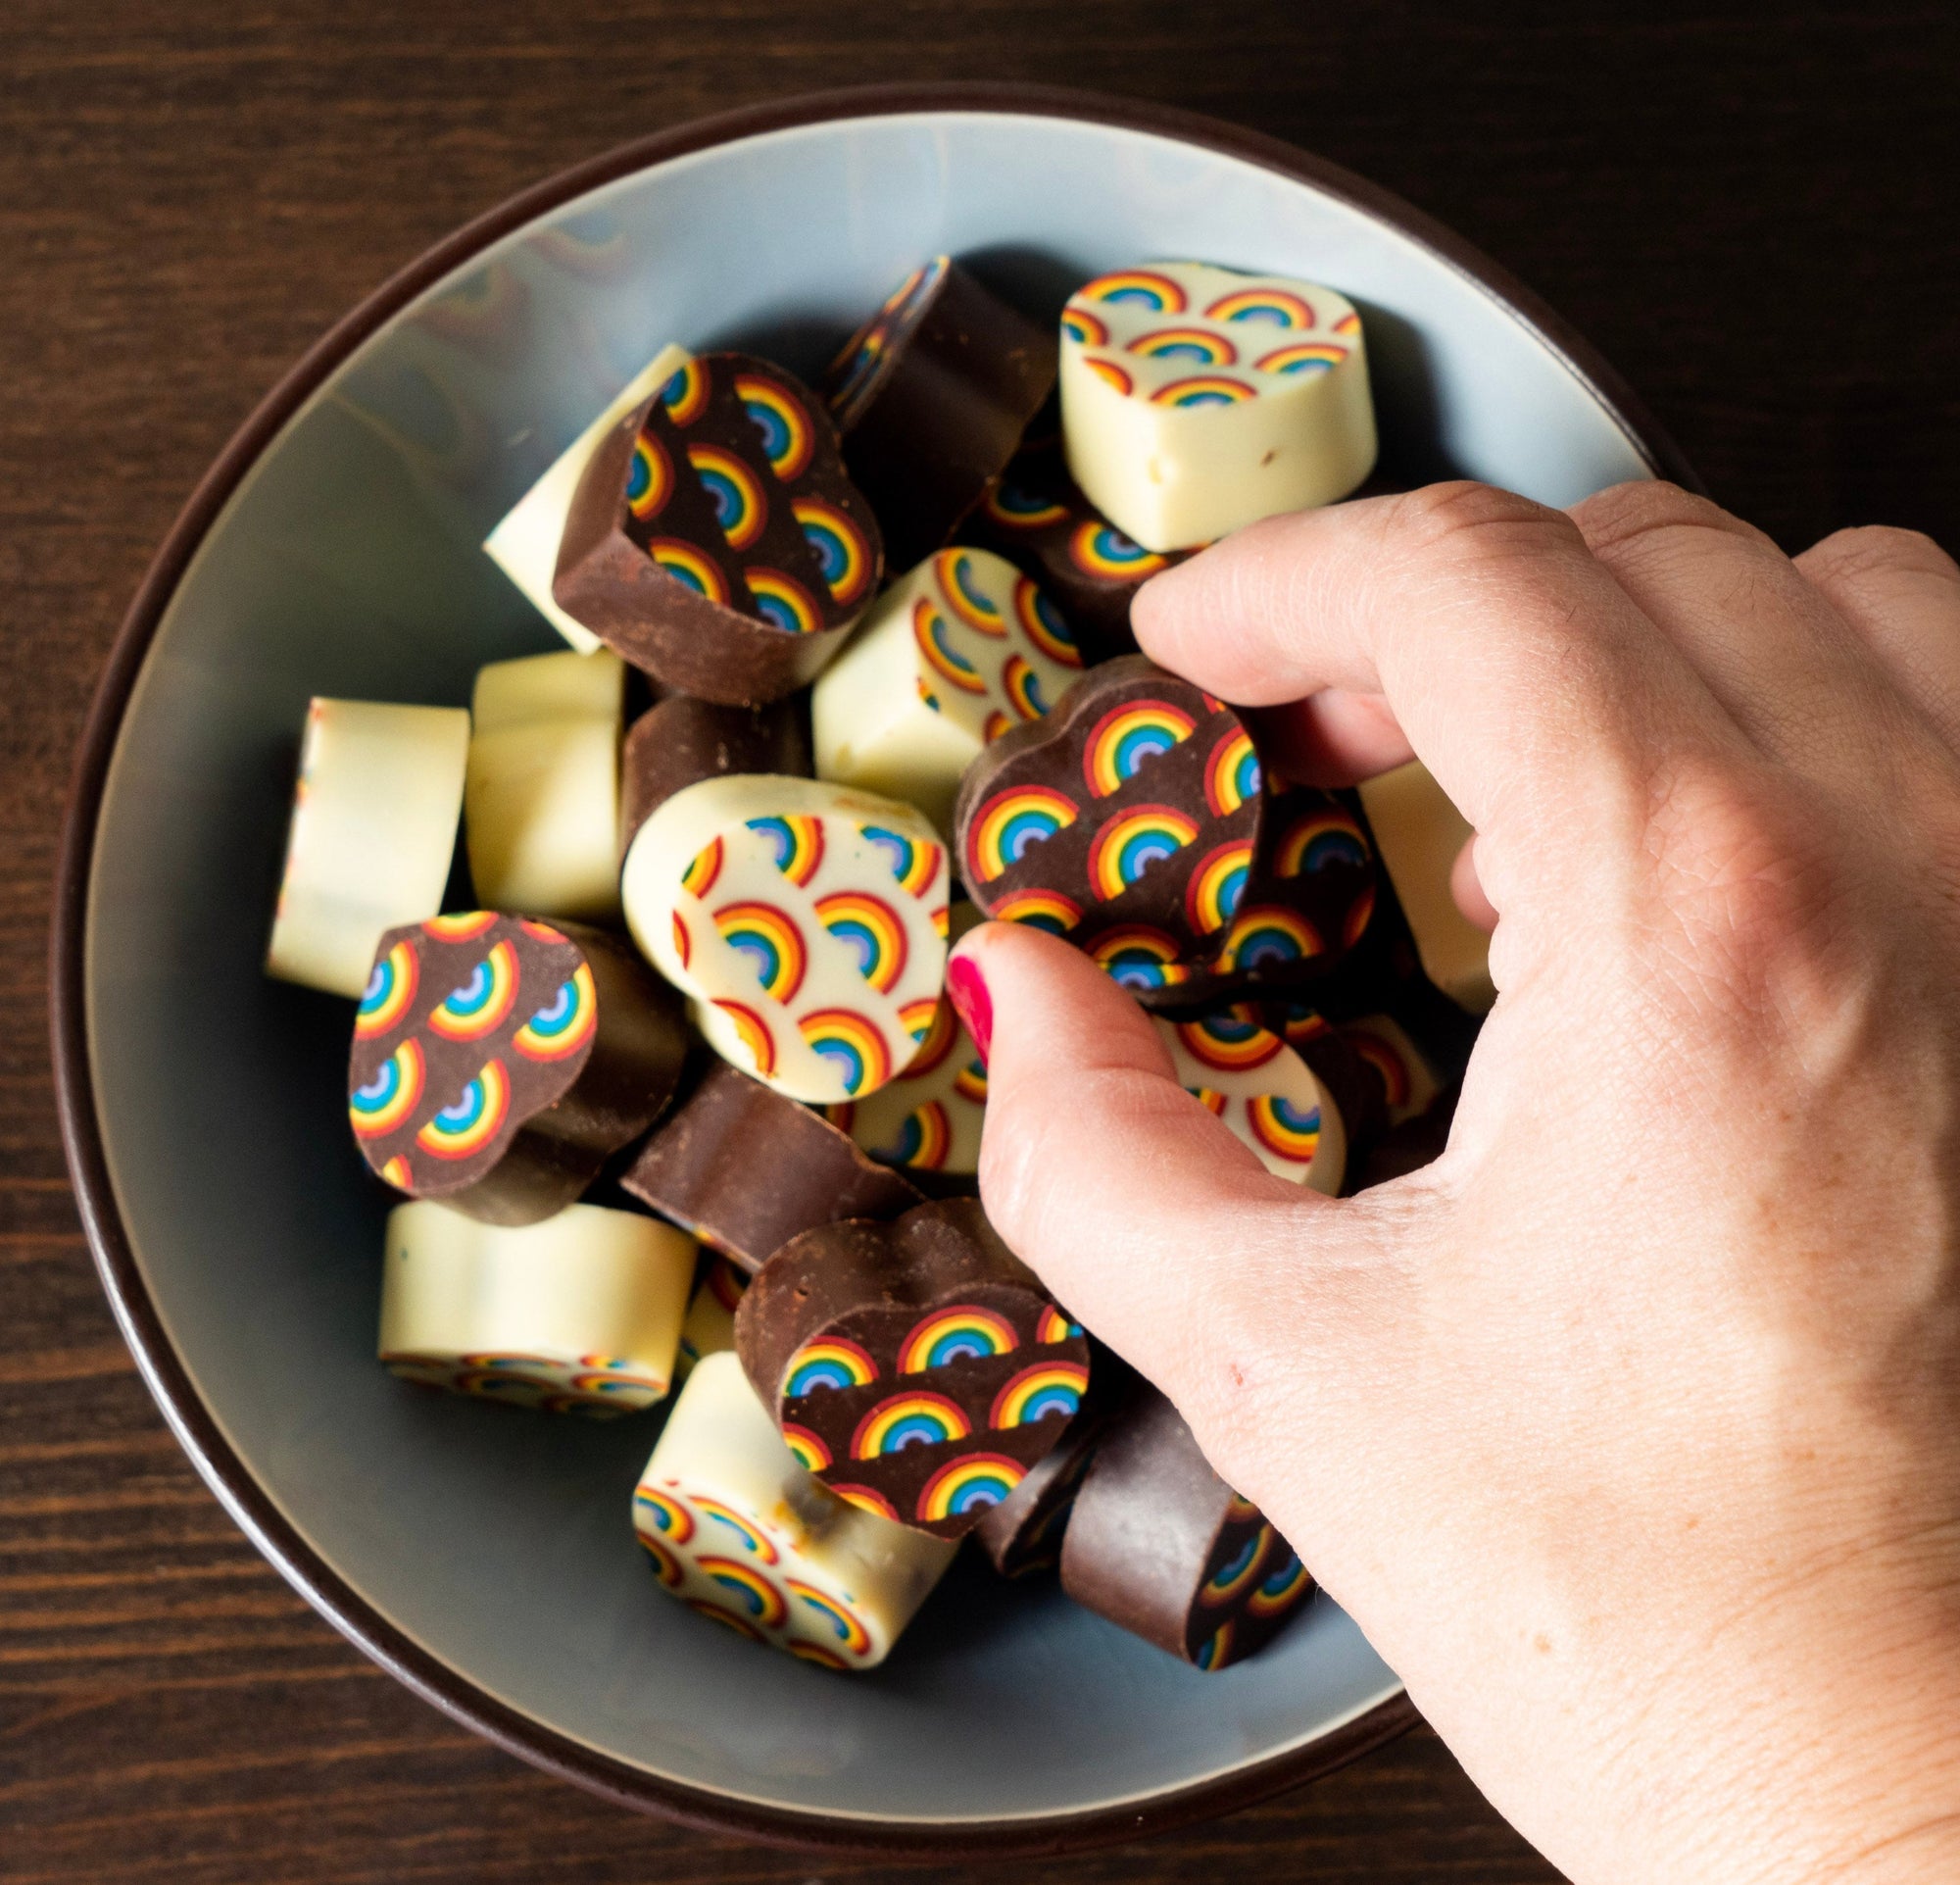 Rainbow Bonbons: Dark & White Chocolate with Dulce de Leche Wooden Table Baking Co.